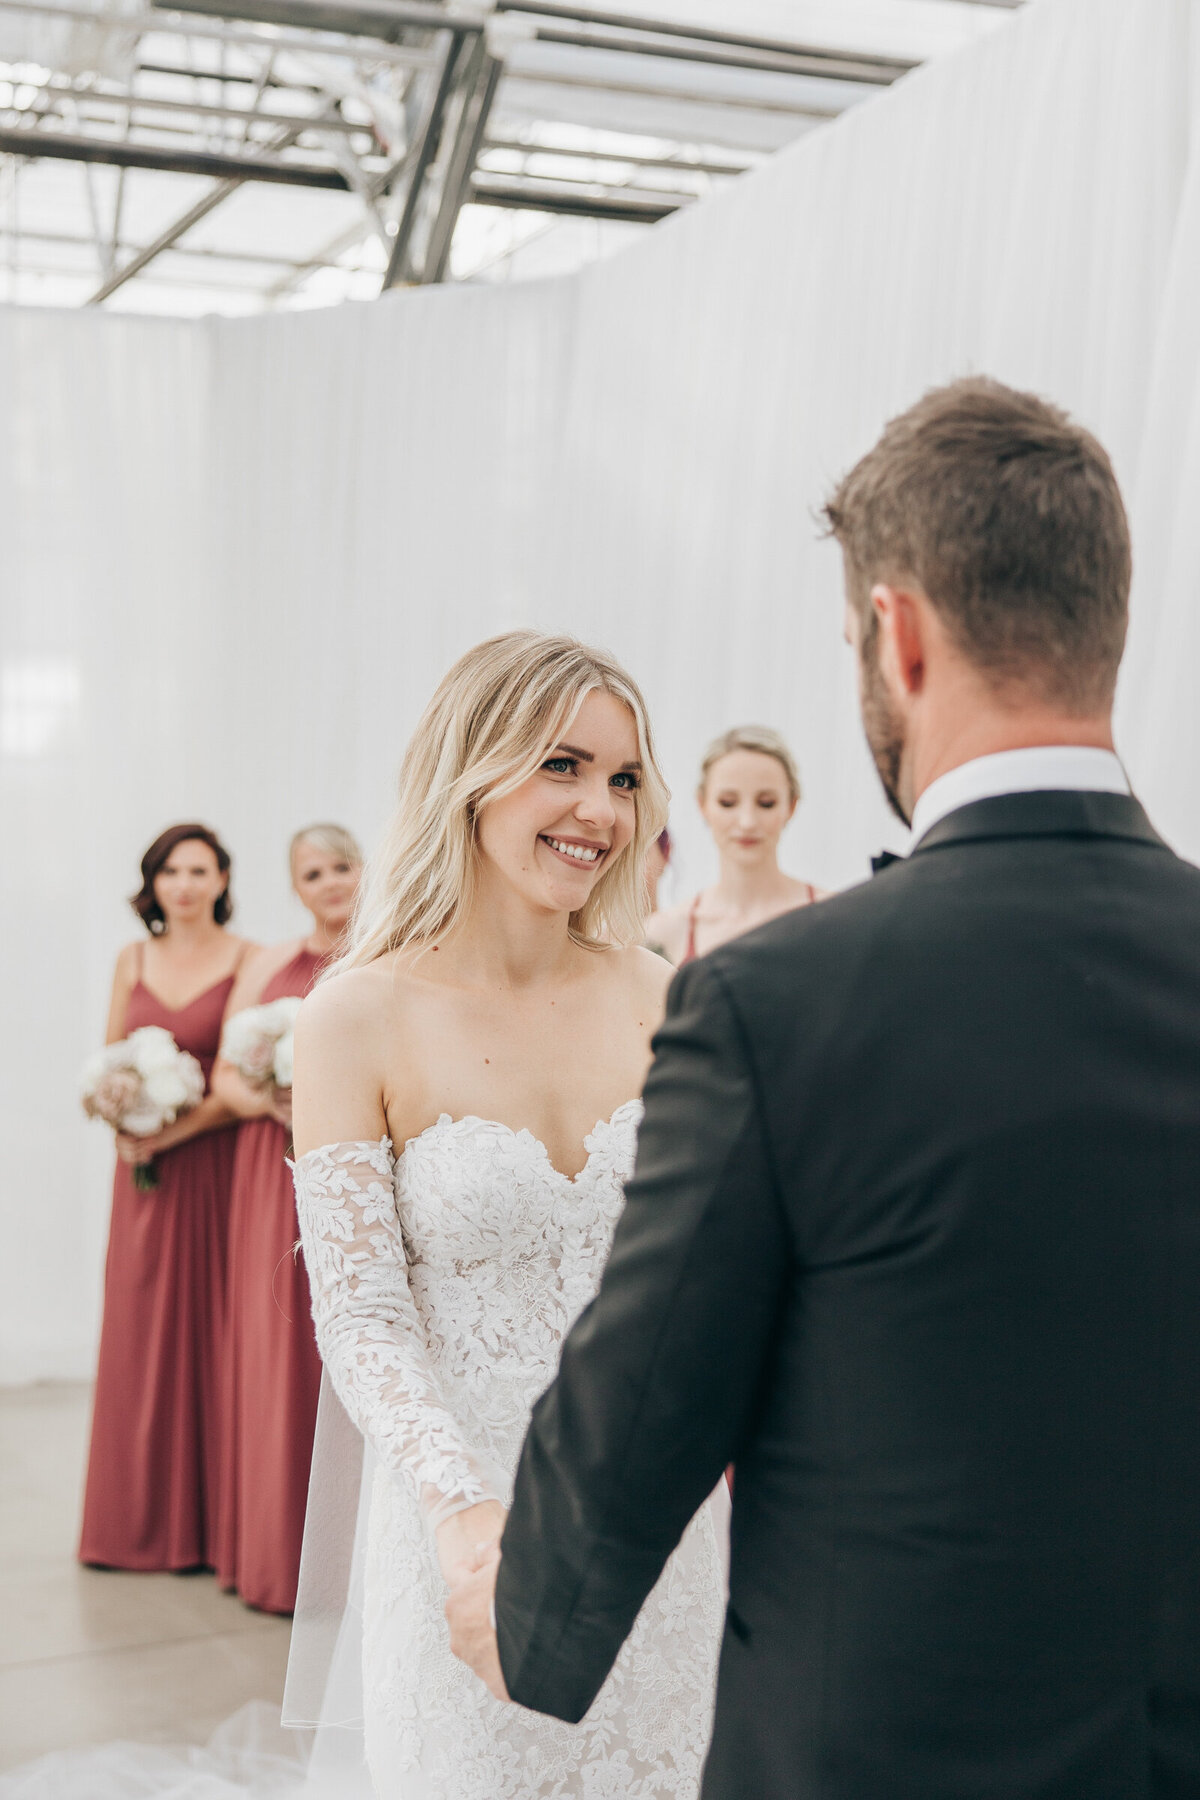 Candid photo of bride smiling at groom during luxurious wedding ceremony